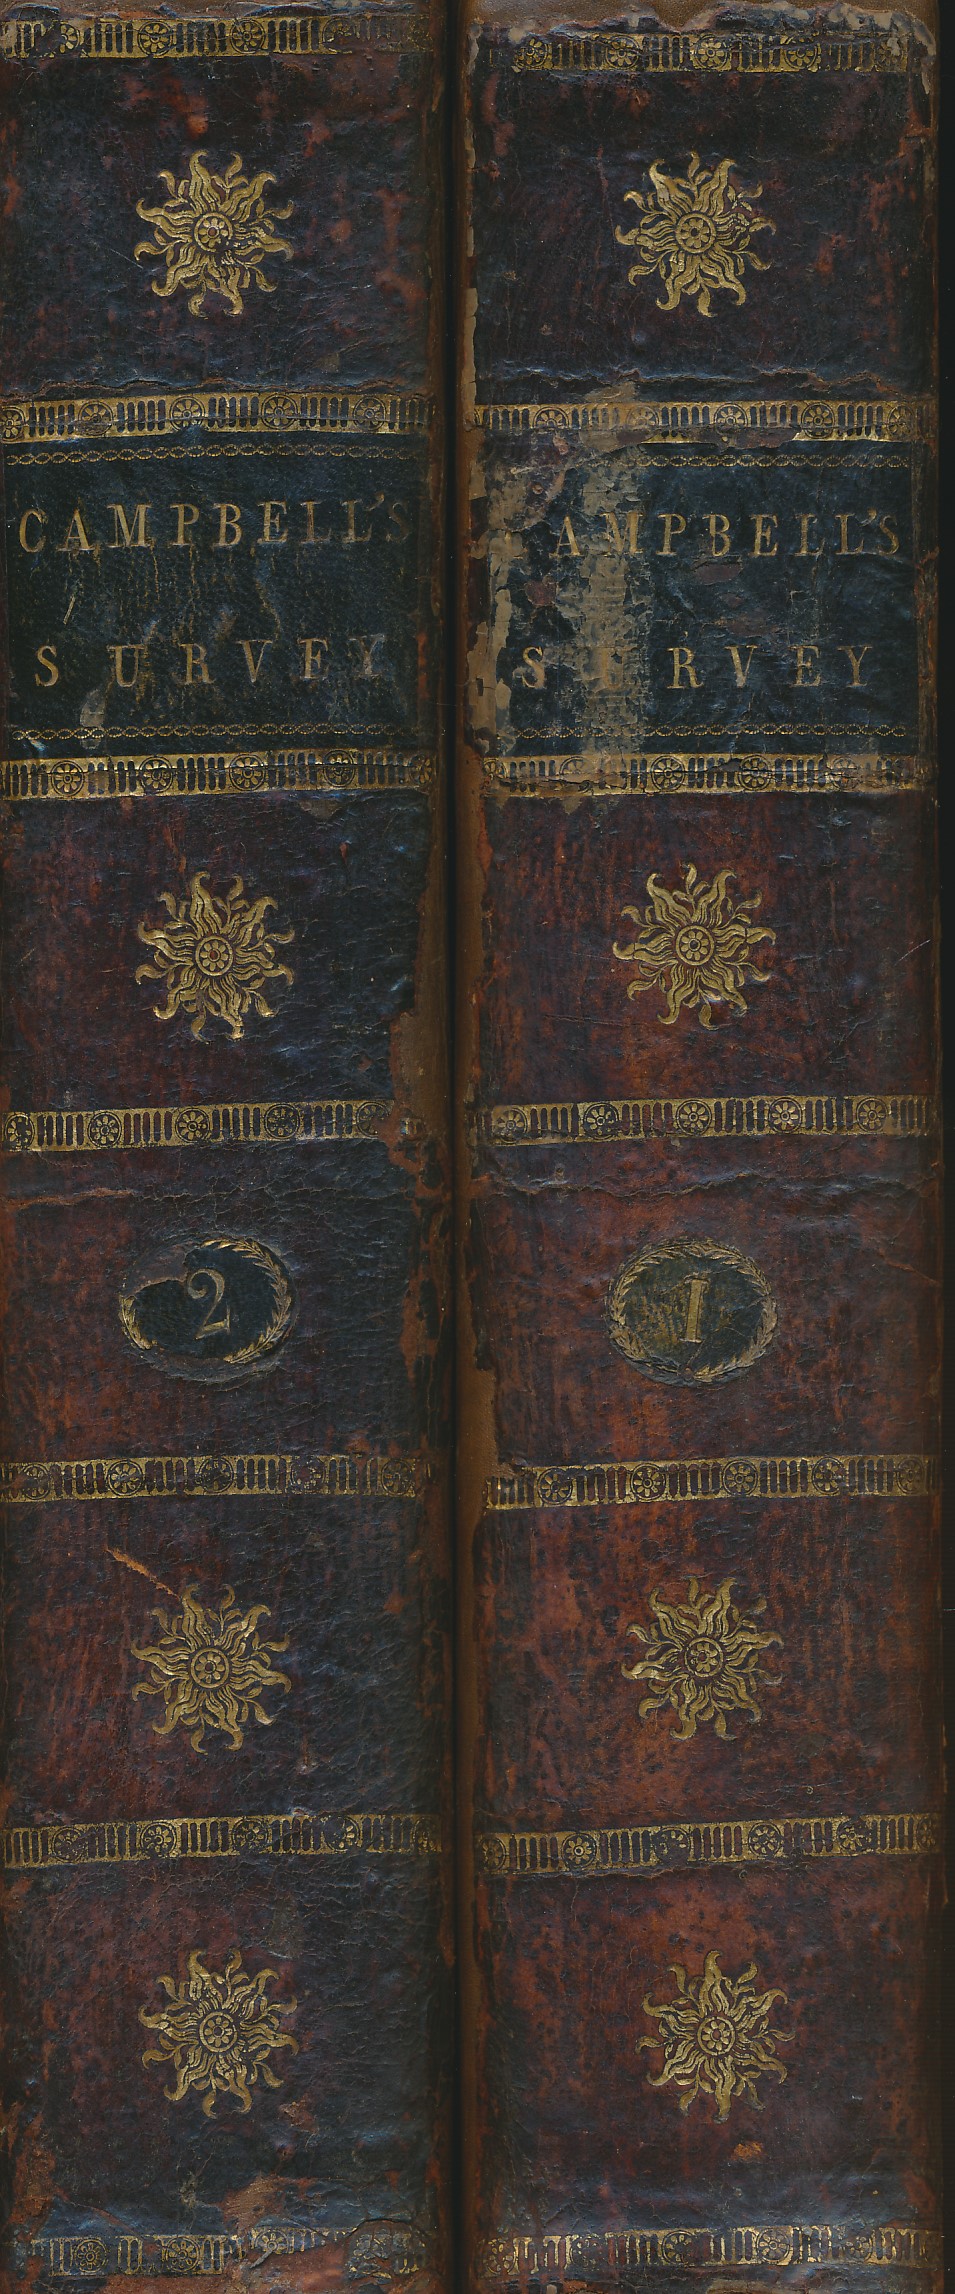 A Political Survey of Britain Being A Series of Reflections on the Situation of the Inhabitants, Revenues, Colonies and Commerce of this Island. 2 volume set.